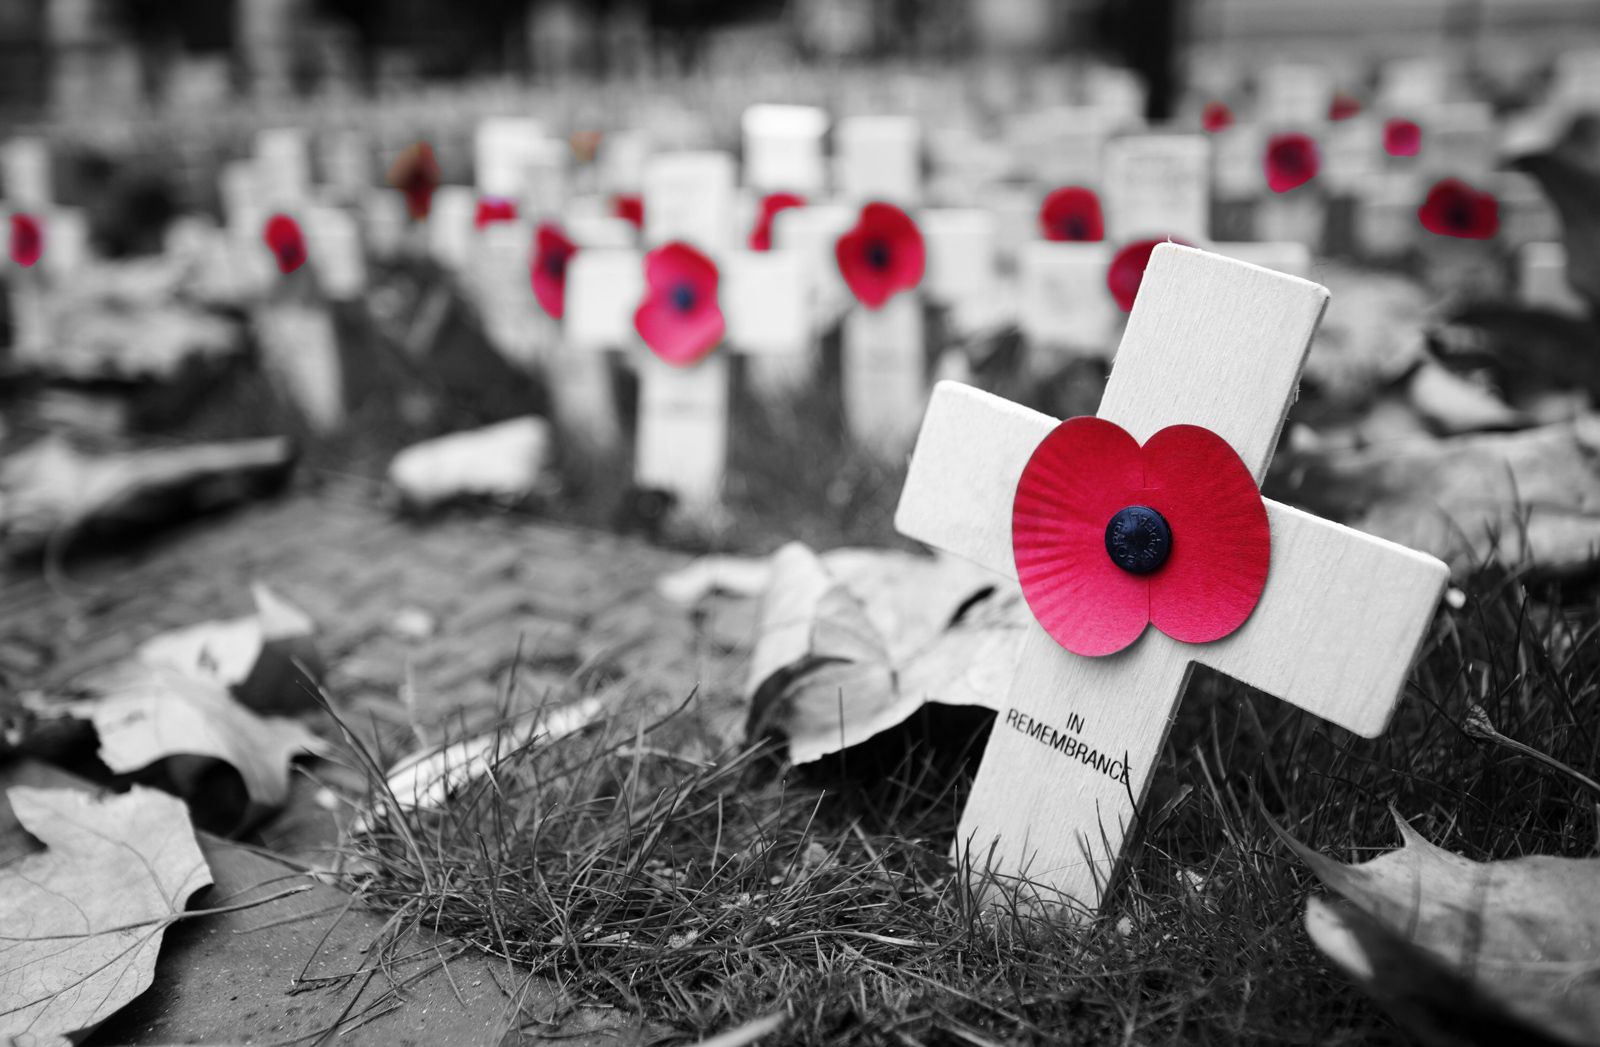 A black and white image of Remembrance crosses with poppies highlighted in red